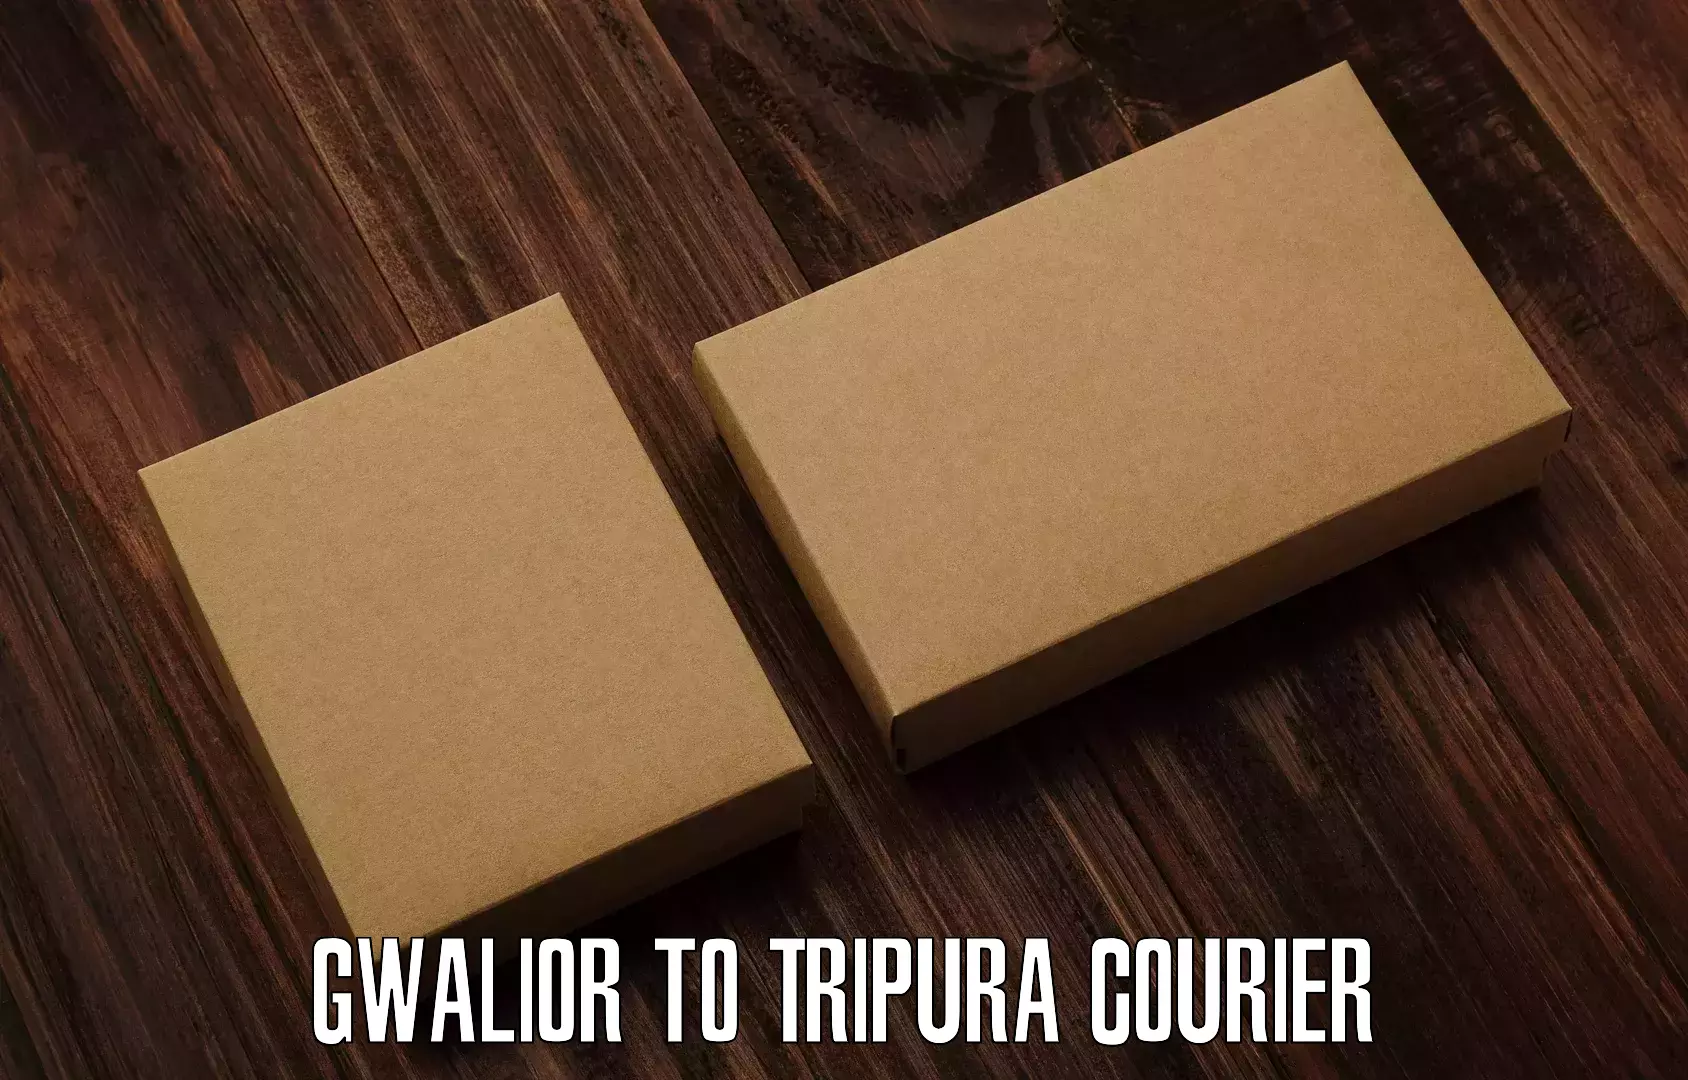 Nationwide parcel services Gwalior to Tripura